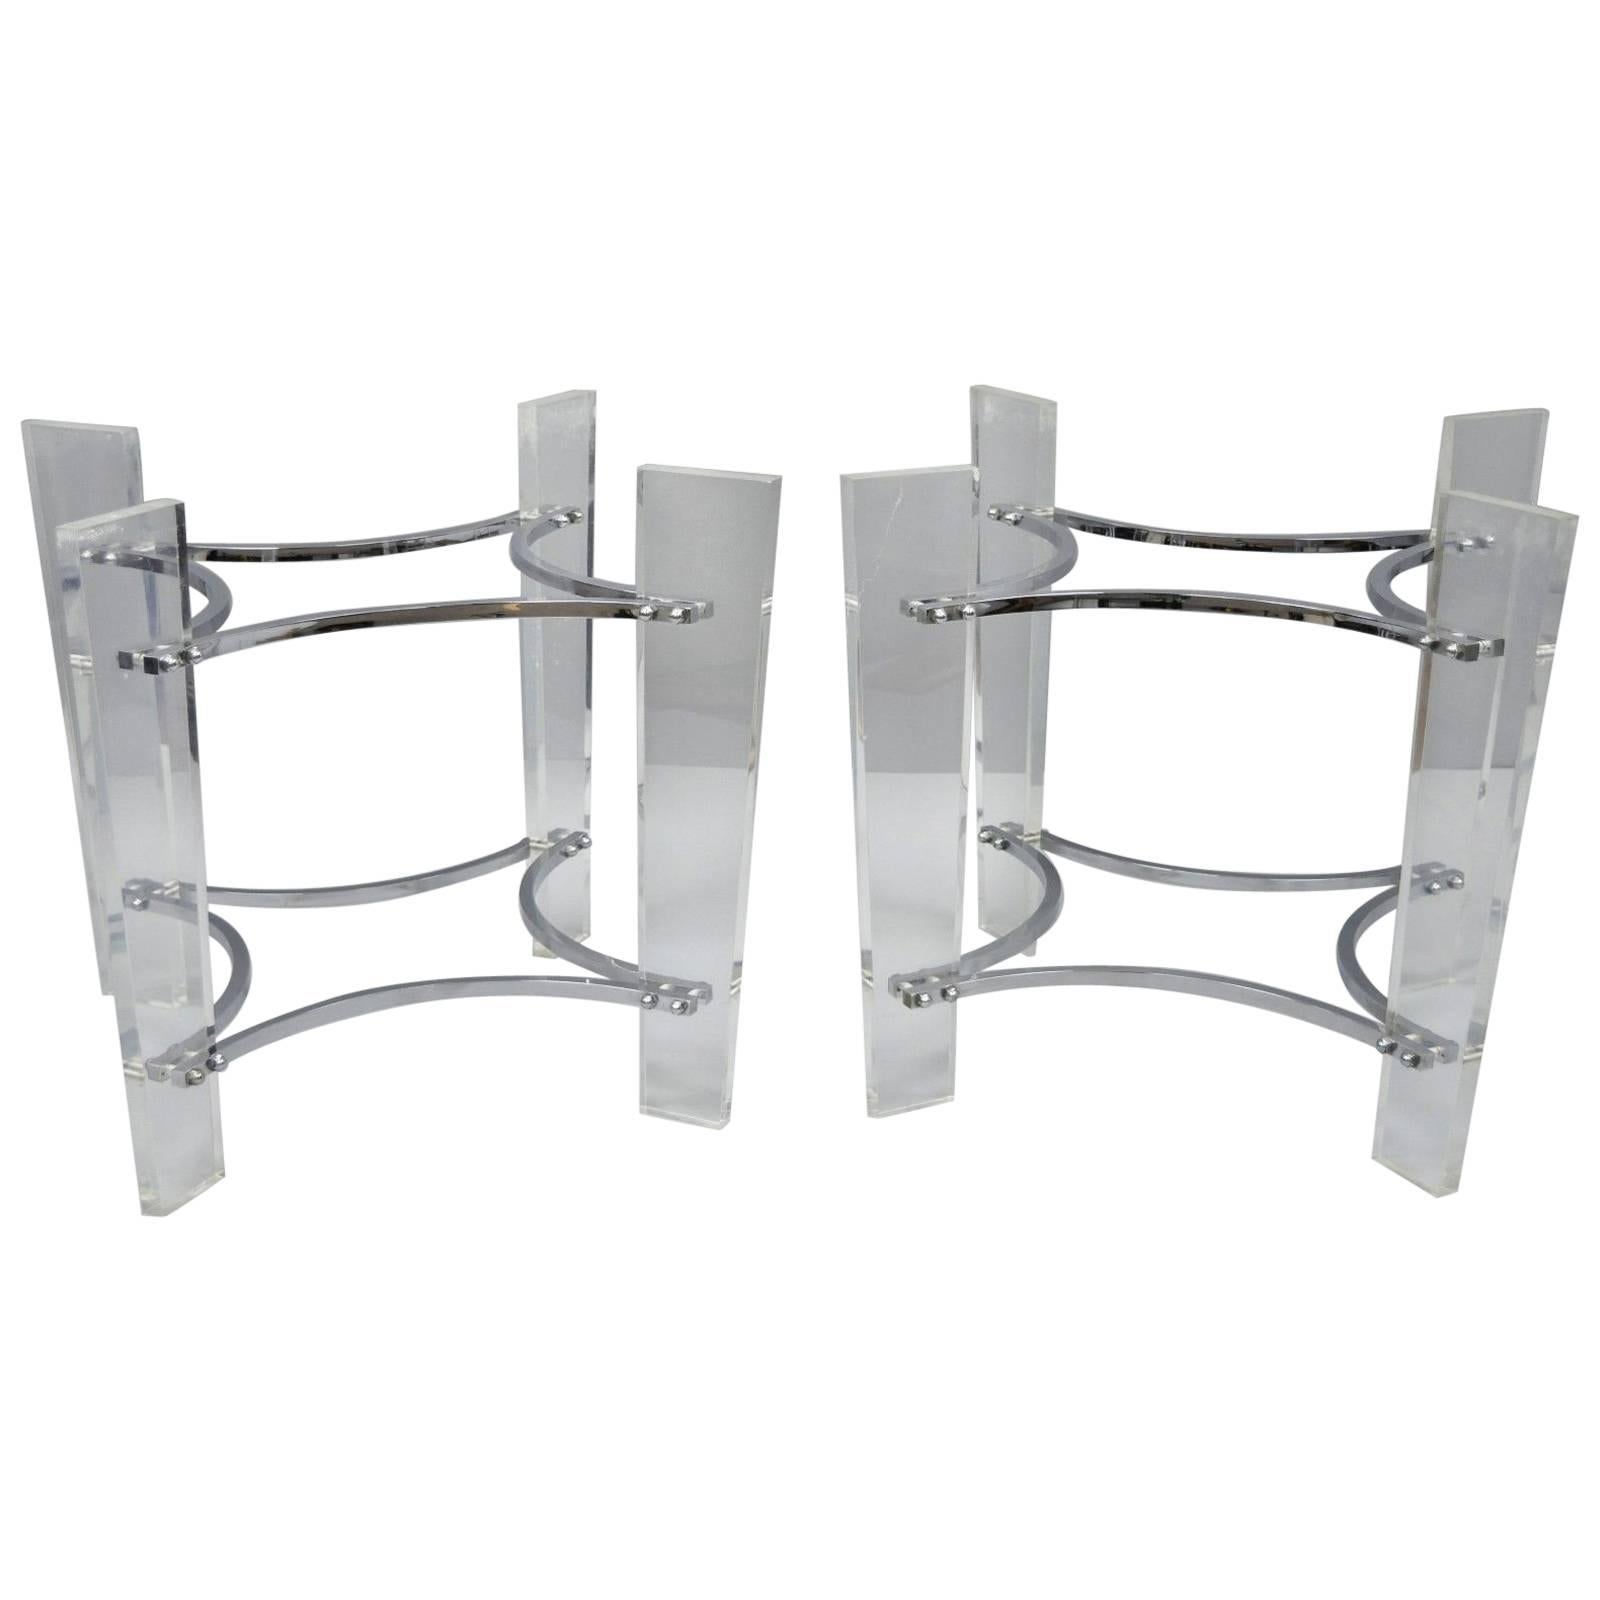 Pair of Lucite & Chrome Sculptural Mid-Century Modern End Table Bases